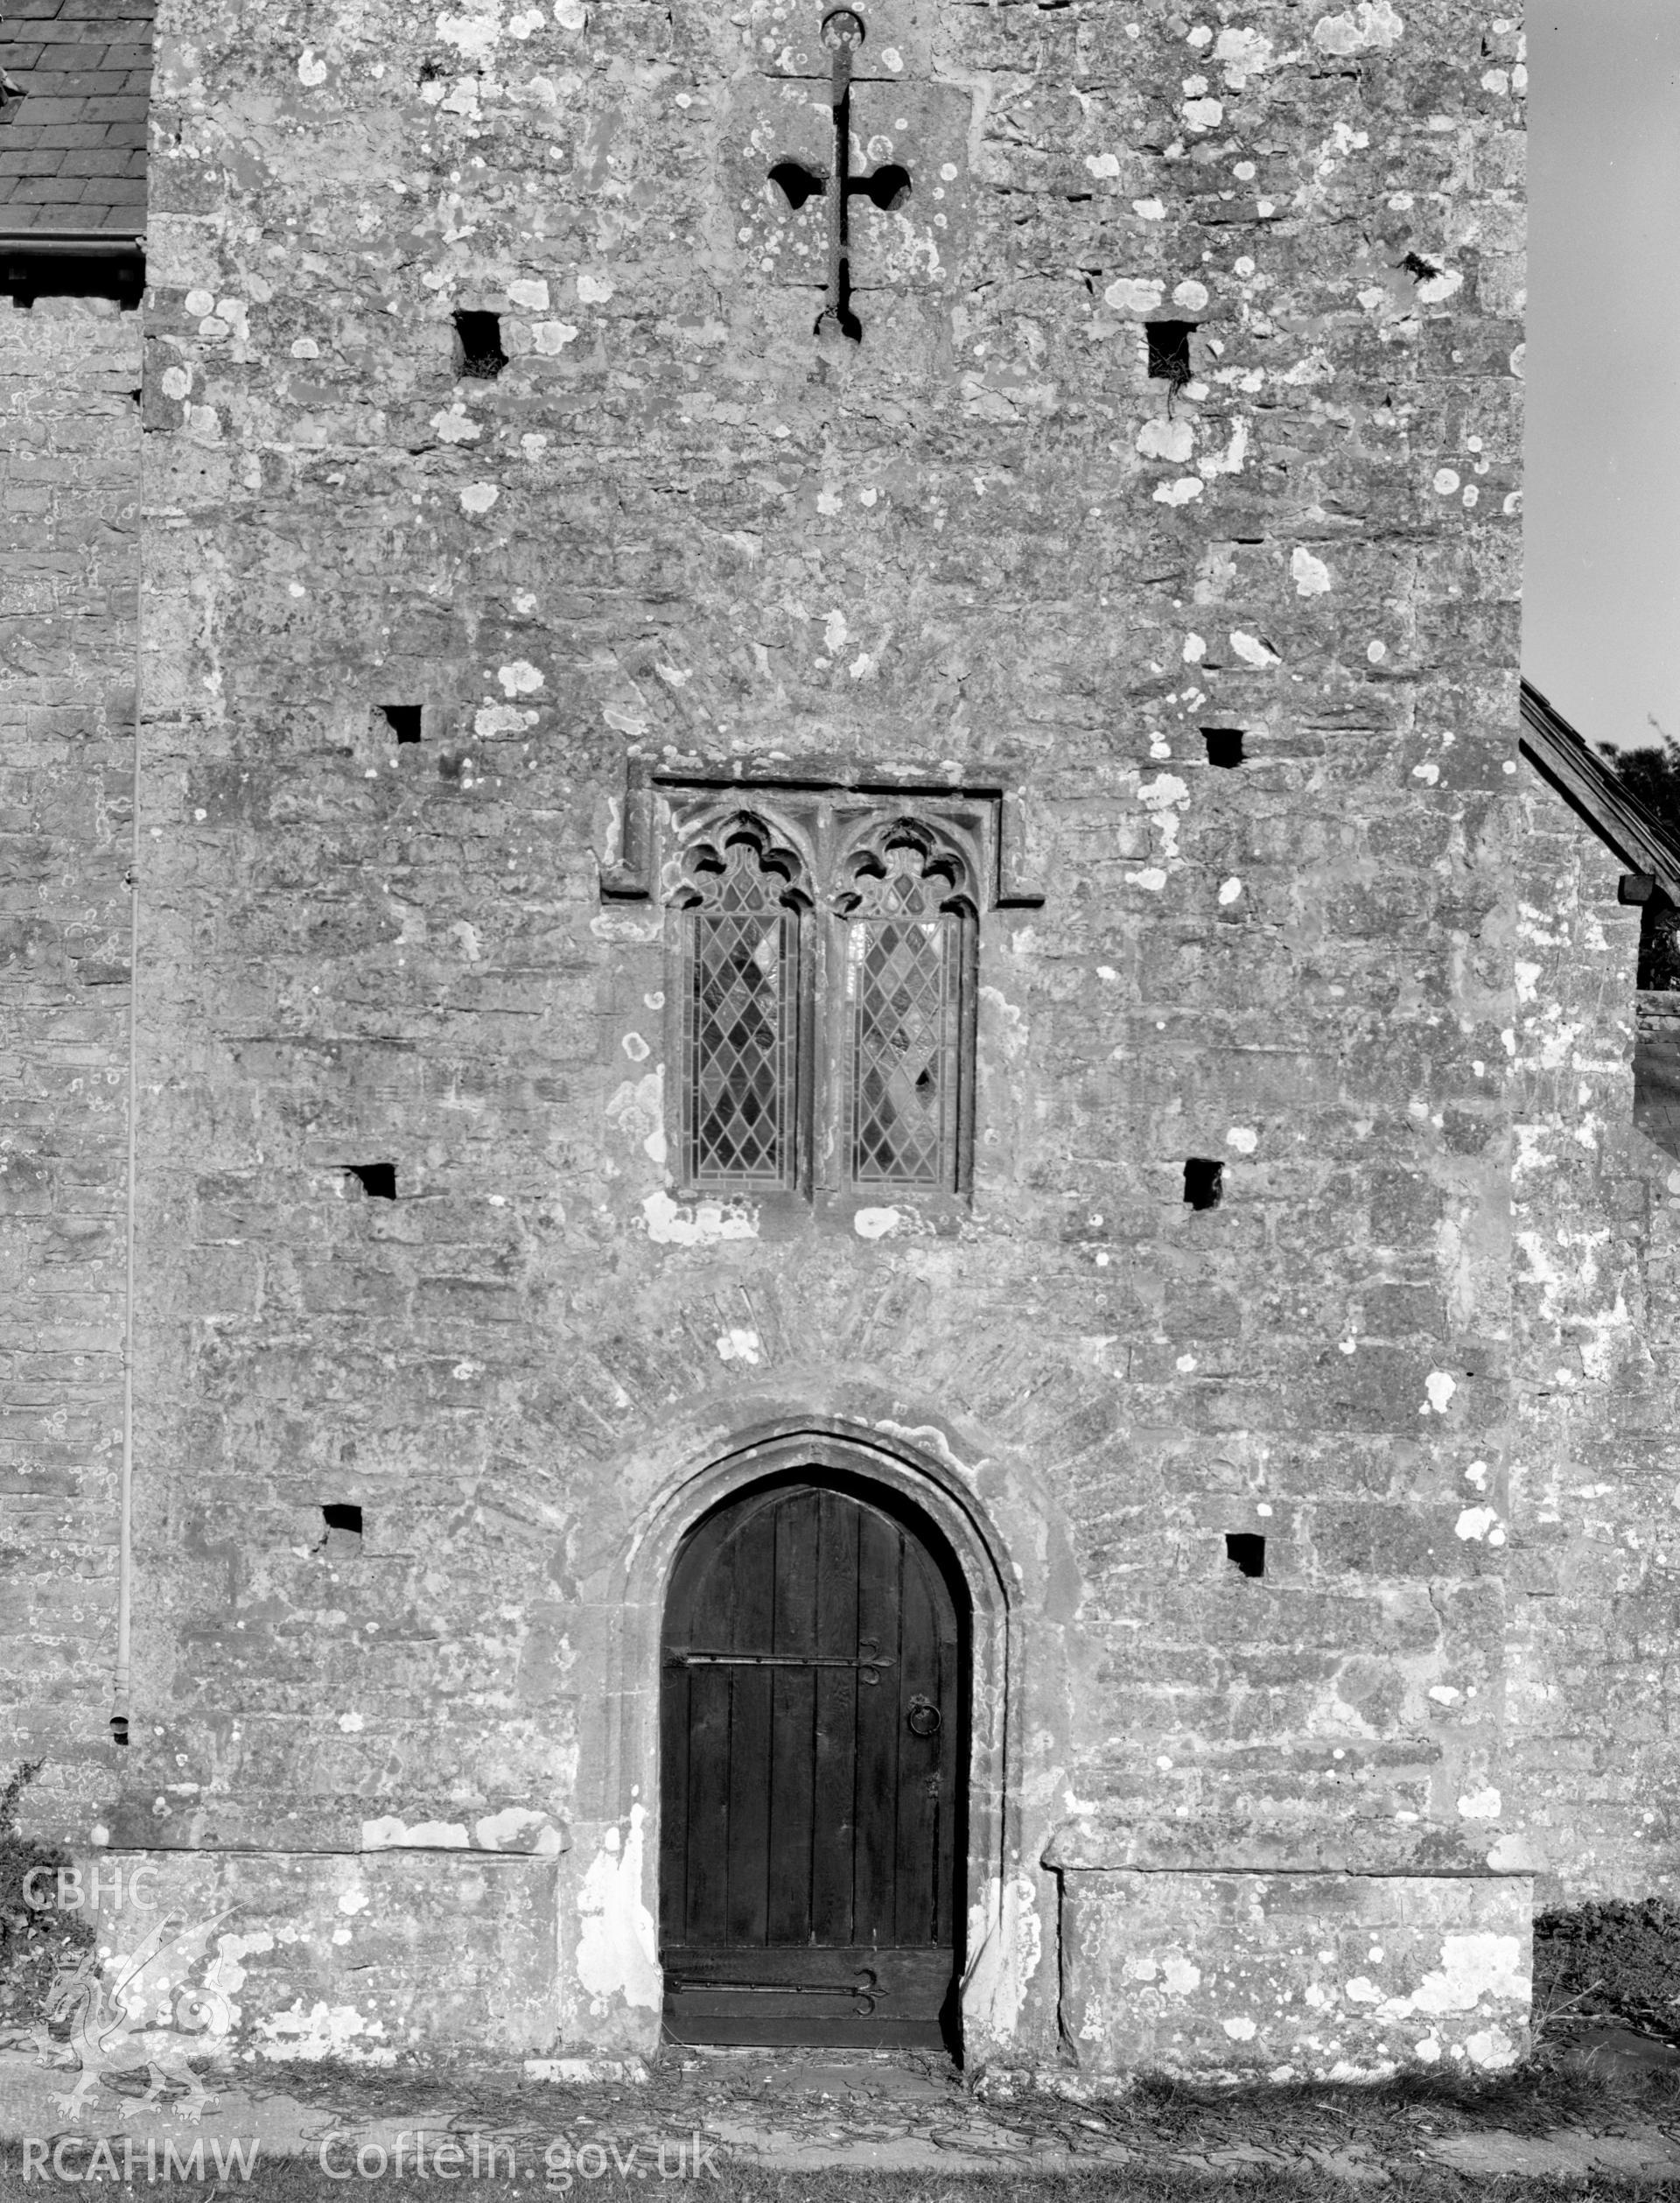 View of the entrance door to the tower at St Michael's Church Llanmihangel taken 07.04.65.